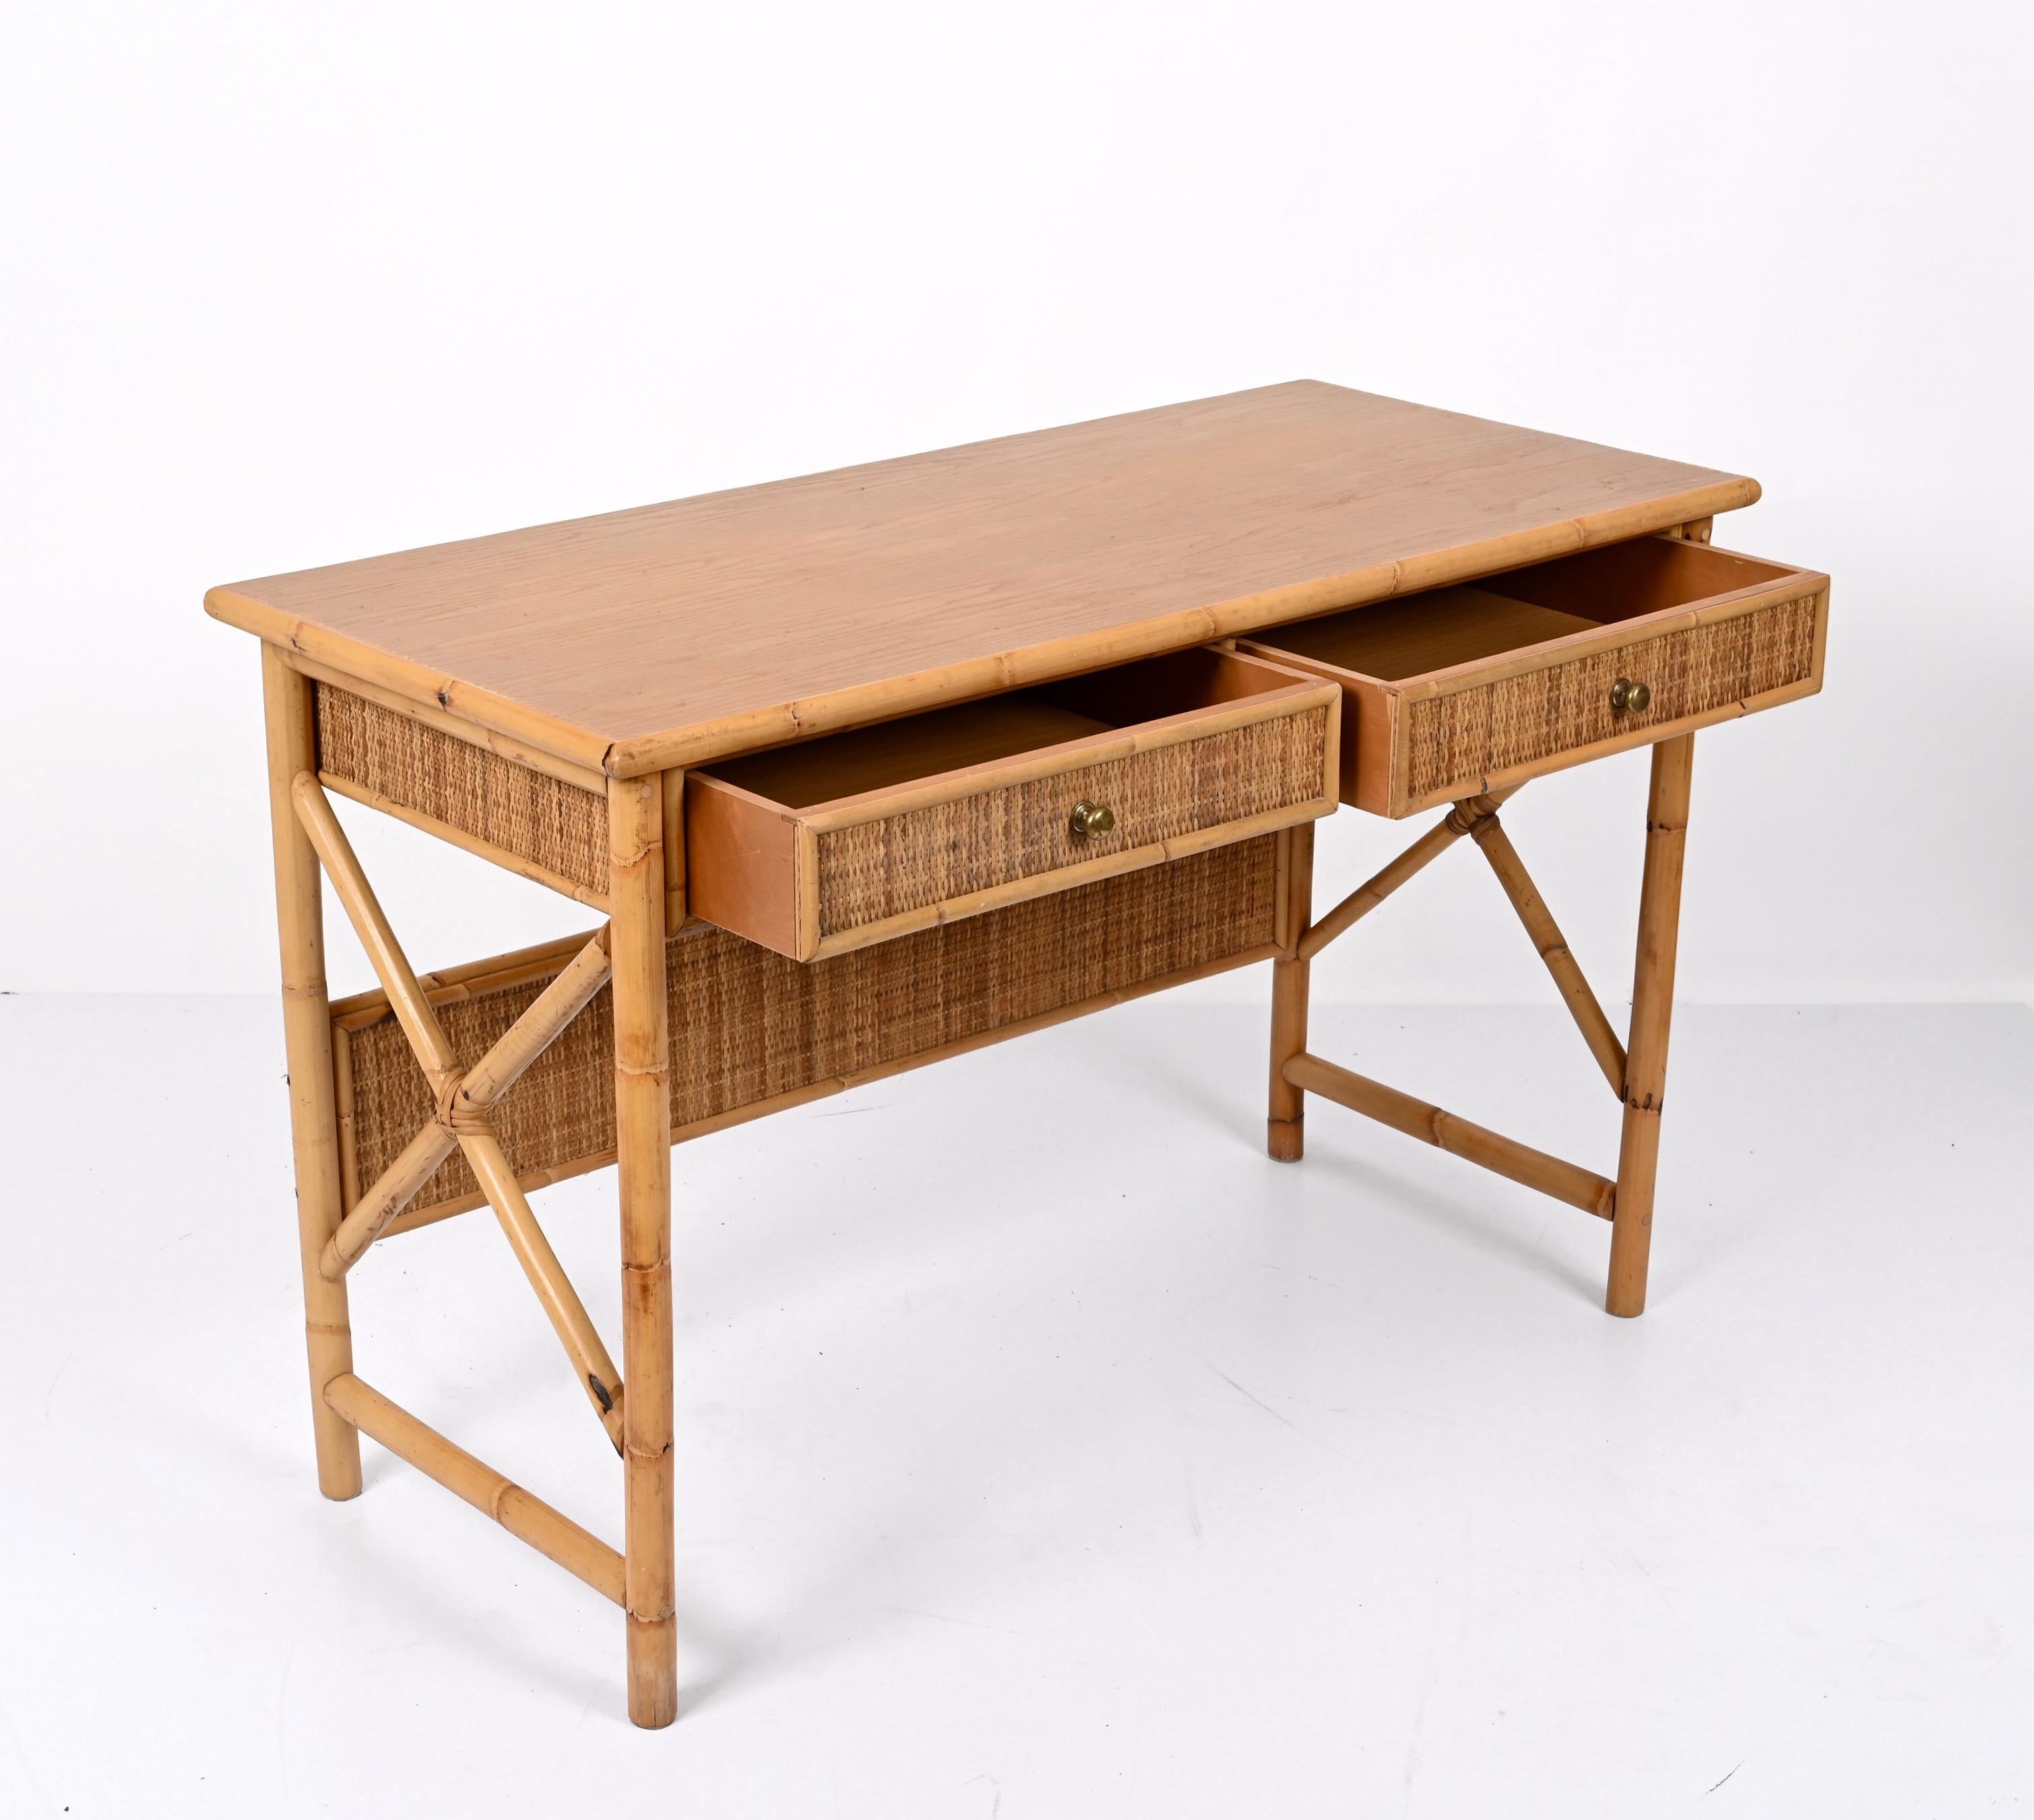 20th Century Midcentury Bamboo Cane, Ash Wood and Rattan Italian Desk with Drawers, 1980s